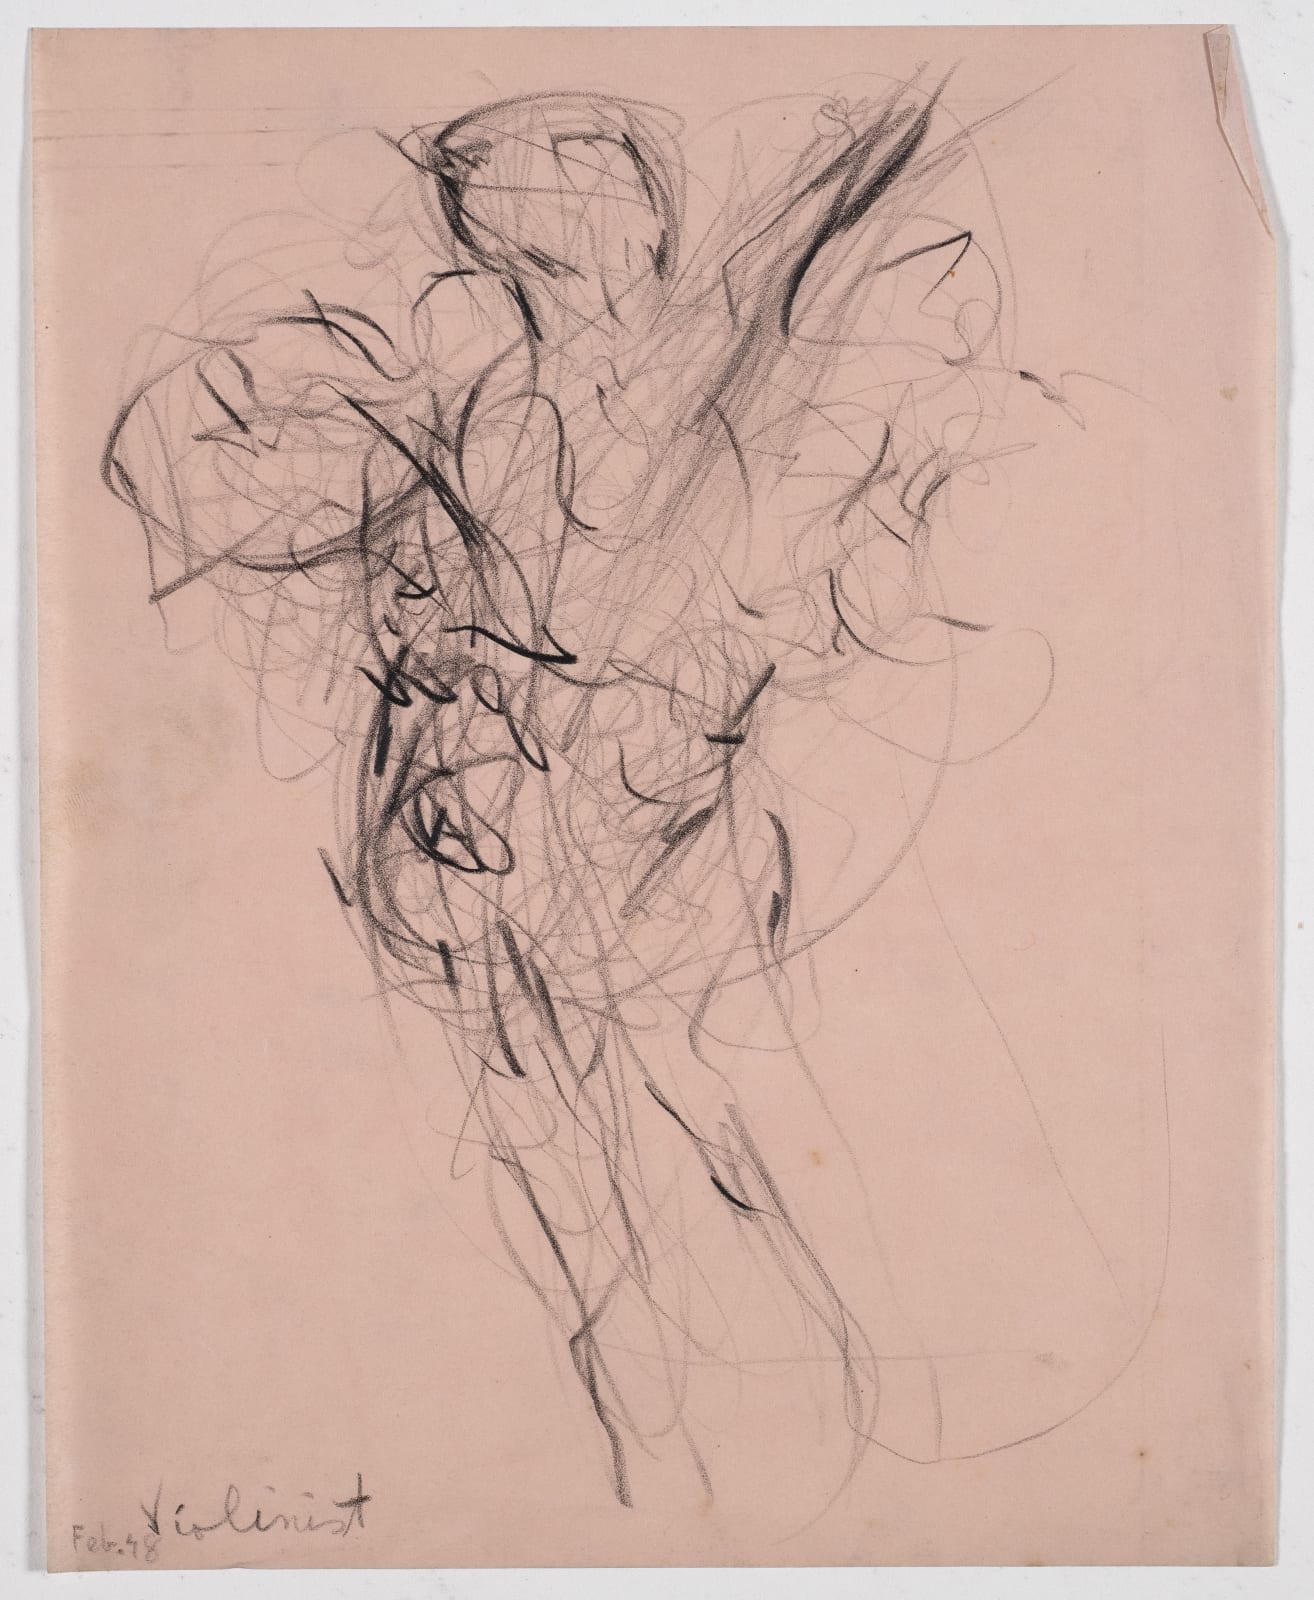 Violinist, February 1948 Pencil on paper 25.5 x 20.4cm The Gustav Metzger Foundation